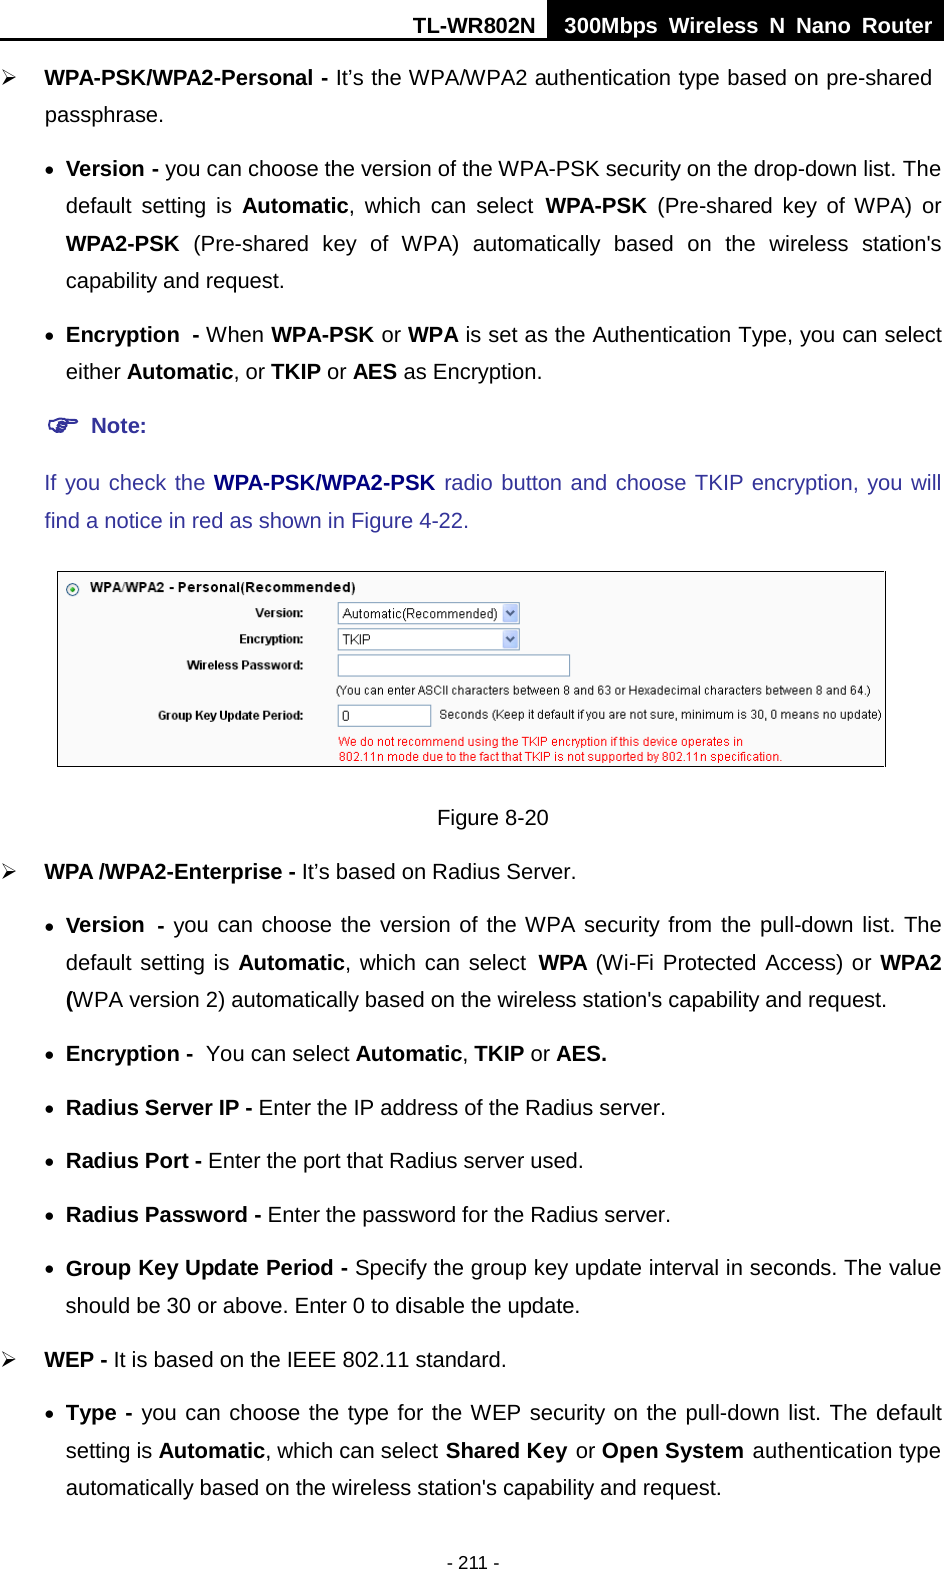 TL-WR802N  300Mbps Wireless N Nano Router   WPA-PSK/WPA2-Personal - It’s the WPA/WPA2 authentication type based on pre-shared passphrase.   • Version - you can choose the version of the WPA-PSK security on the drop-down list. The default setting is Automatic, which can select WPA-PSK  (Pre-shared key of WPA) or WPA2-PSK  (Pre-shared key of WPA) automatically based on the wireless station&apos;s capability and request. • Encryption - When WPA-PSK or WPA is set as the Authentication Type, you can select either Automatic, or TKIP or AES as Encryption.  Note:   If you check the WPA-PSK/WPA2-PSK radio button and choose TKIP encryption, you will find a notice in red as shown in Figure 4-22.  Figure 8-20  WPA /WPA2-Enterprise - It’s based on Radius Server. • Version - you can choose the version of the WPA security from the pull-down list. The default setting is Automatic, which can select WPA (Wi-Fi Protected Access) or WPA2 (WPA version 2) automatically based on the wireless station&apos;s capability and request. • Encryption - You can select Automatic, TKIP or AES. • Radius Server IP - Enter the IP address of the Radius server. • Radius Port - Enter the port that Radius server used. • Radius Password - Enter the password for the Radius server. • Group Key Update Period - Specify the group key update interval in seconds. The value should be 30 or above. Enter 0 to disable the update.  WEP - It is based on the IEEE 802.11 standard.   • Type - you can choose the type for the WEP security on the pull-down list. The default setting is Automatic, which can select Shared Key or Open System authentication type automatically based on the wireless station&apos;s capability and request. - 211 - 